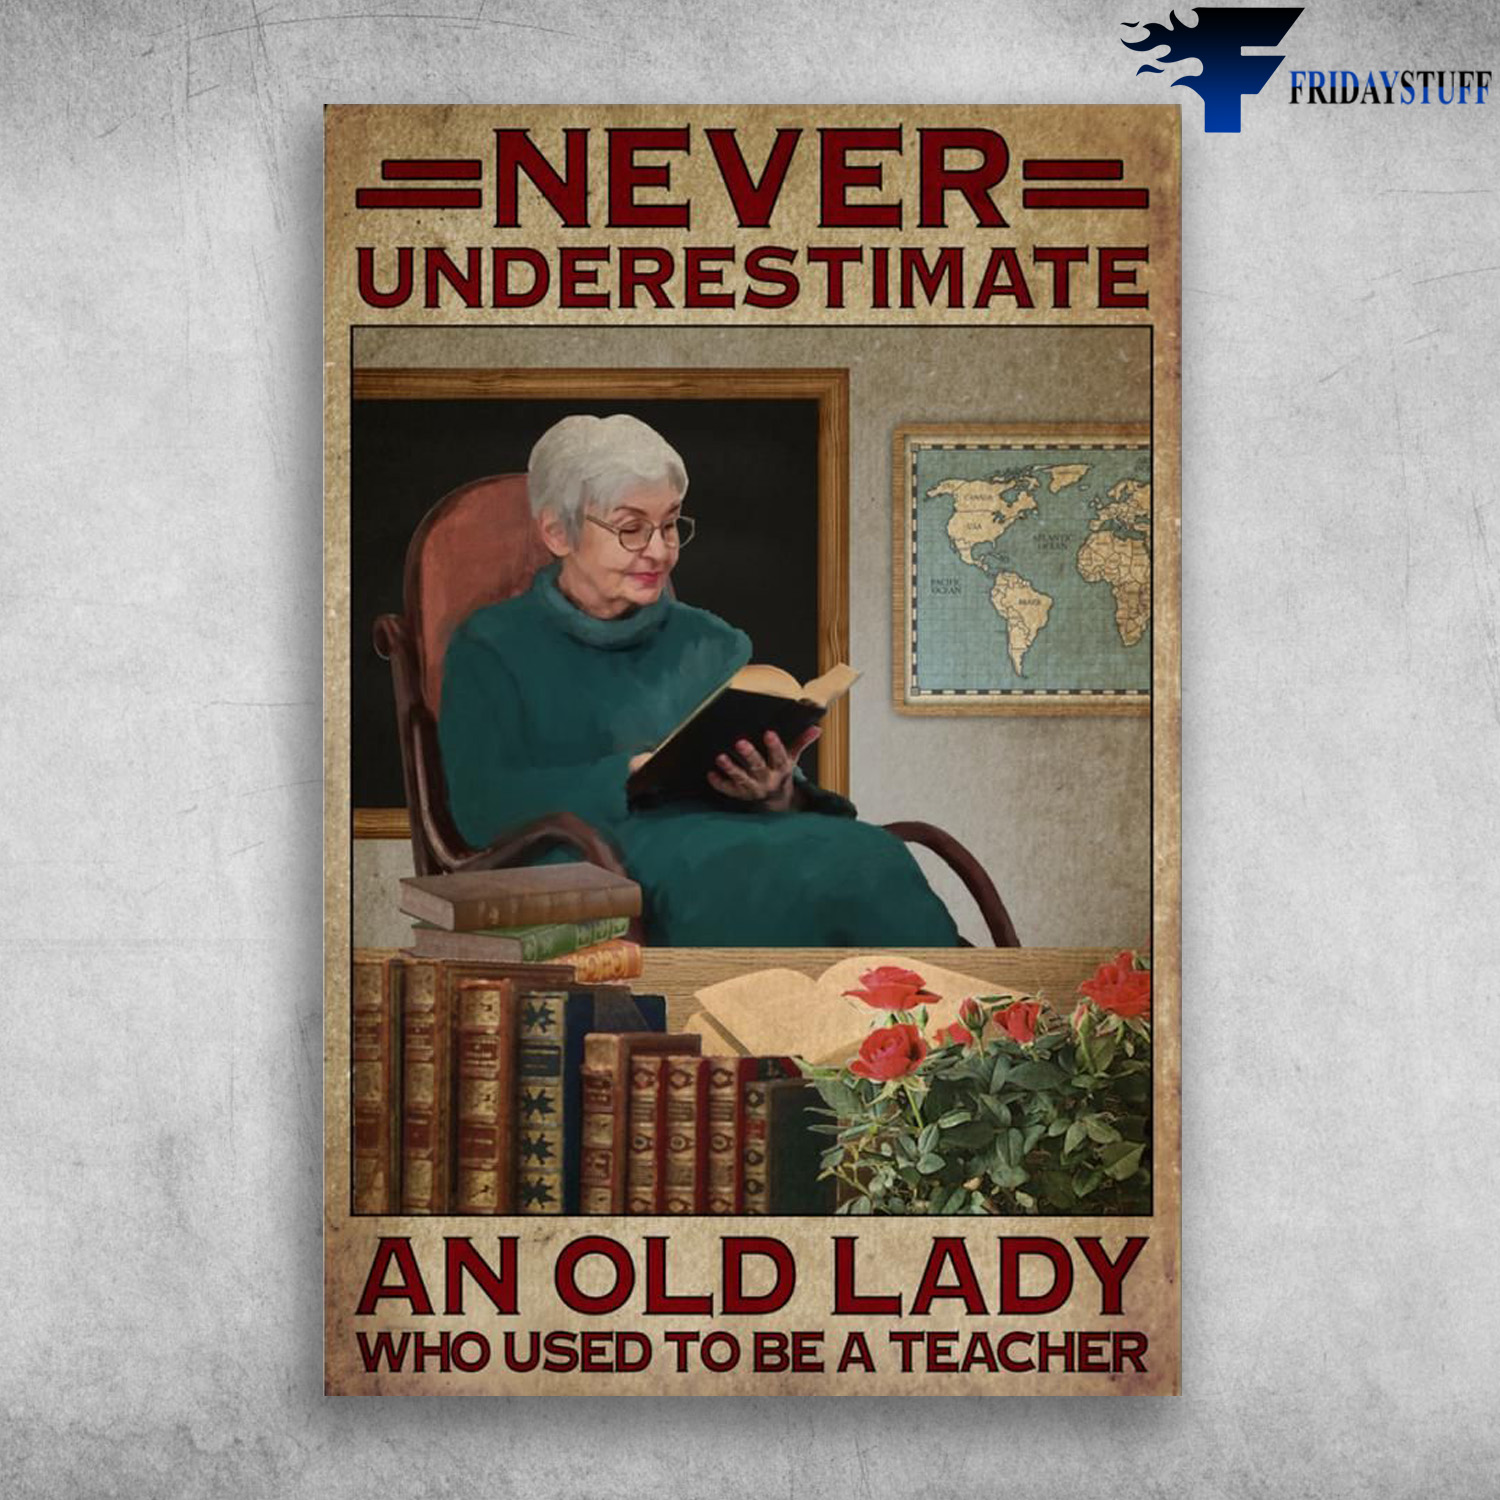 Old Lady Reading Book - Never Underestimate An Old Lady, Who Used To Be A Teacher